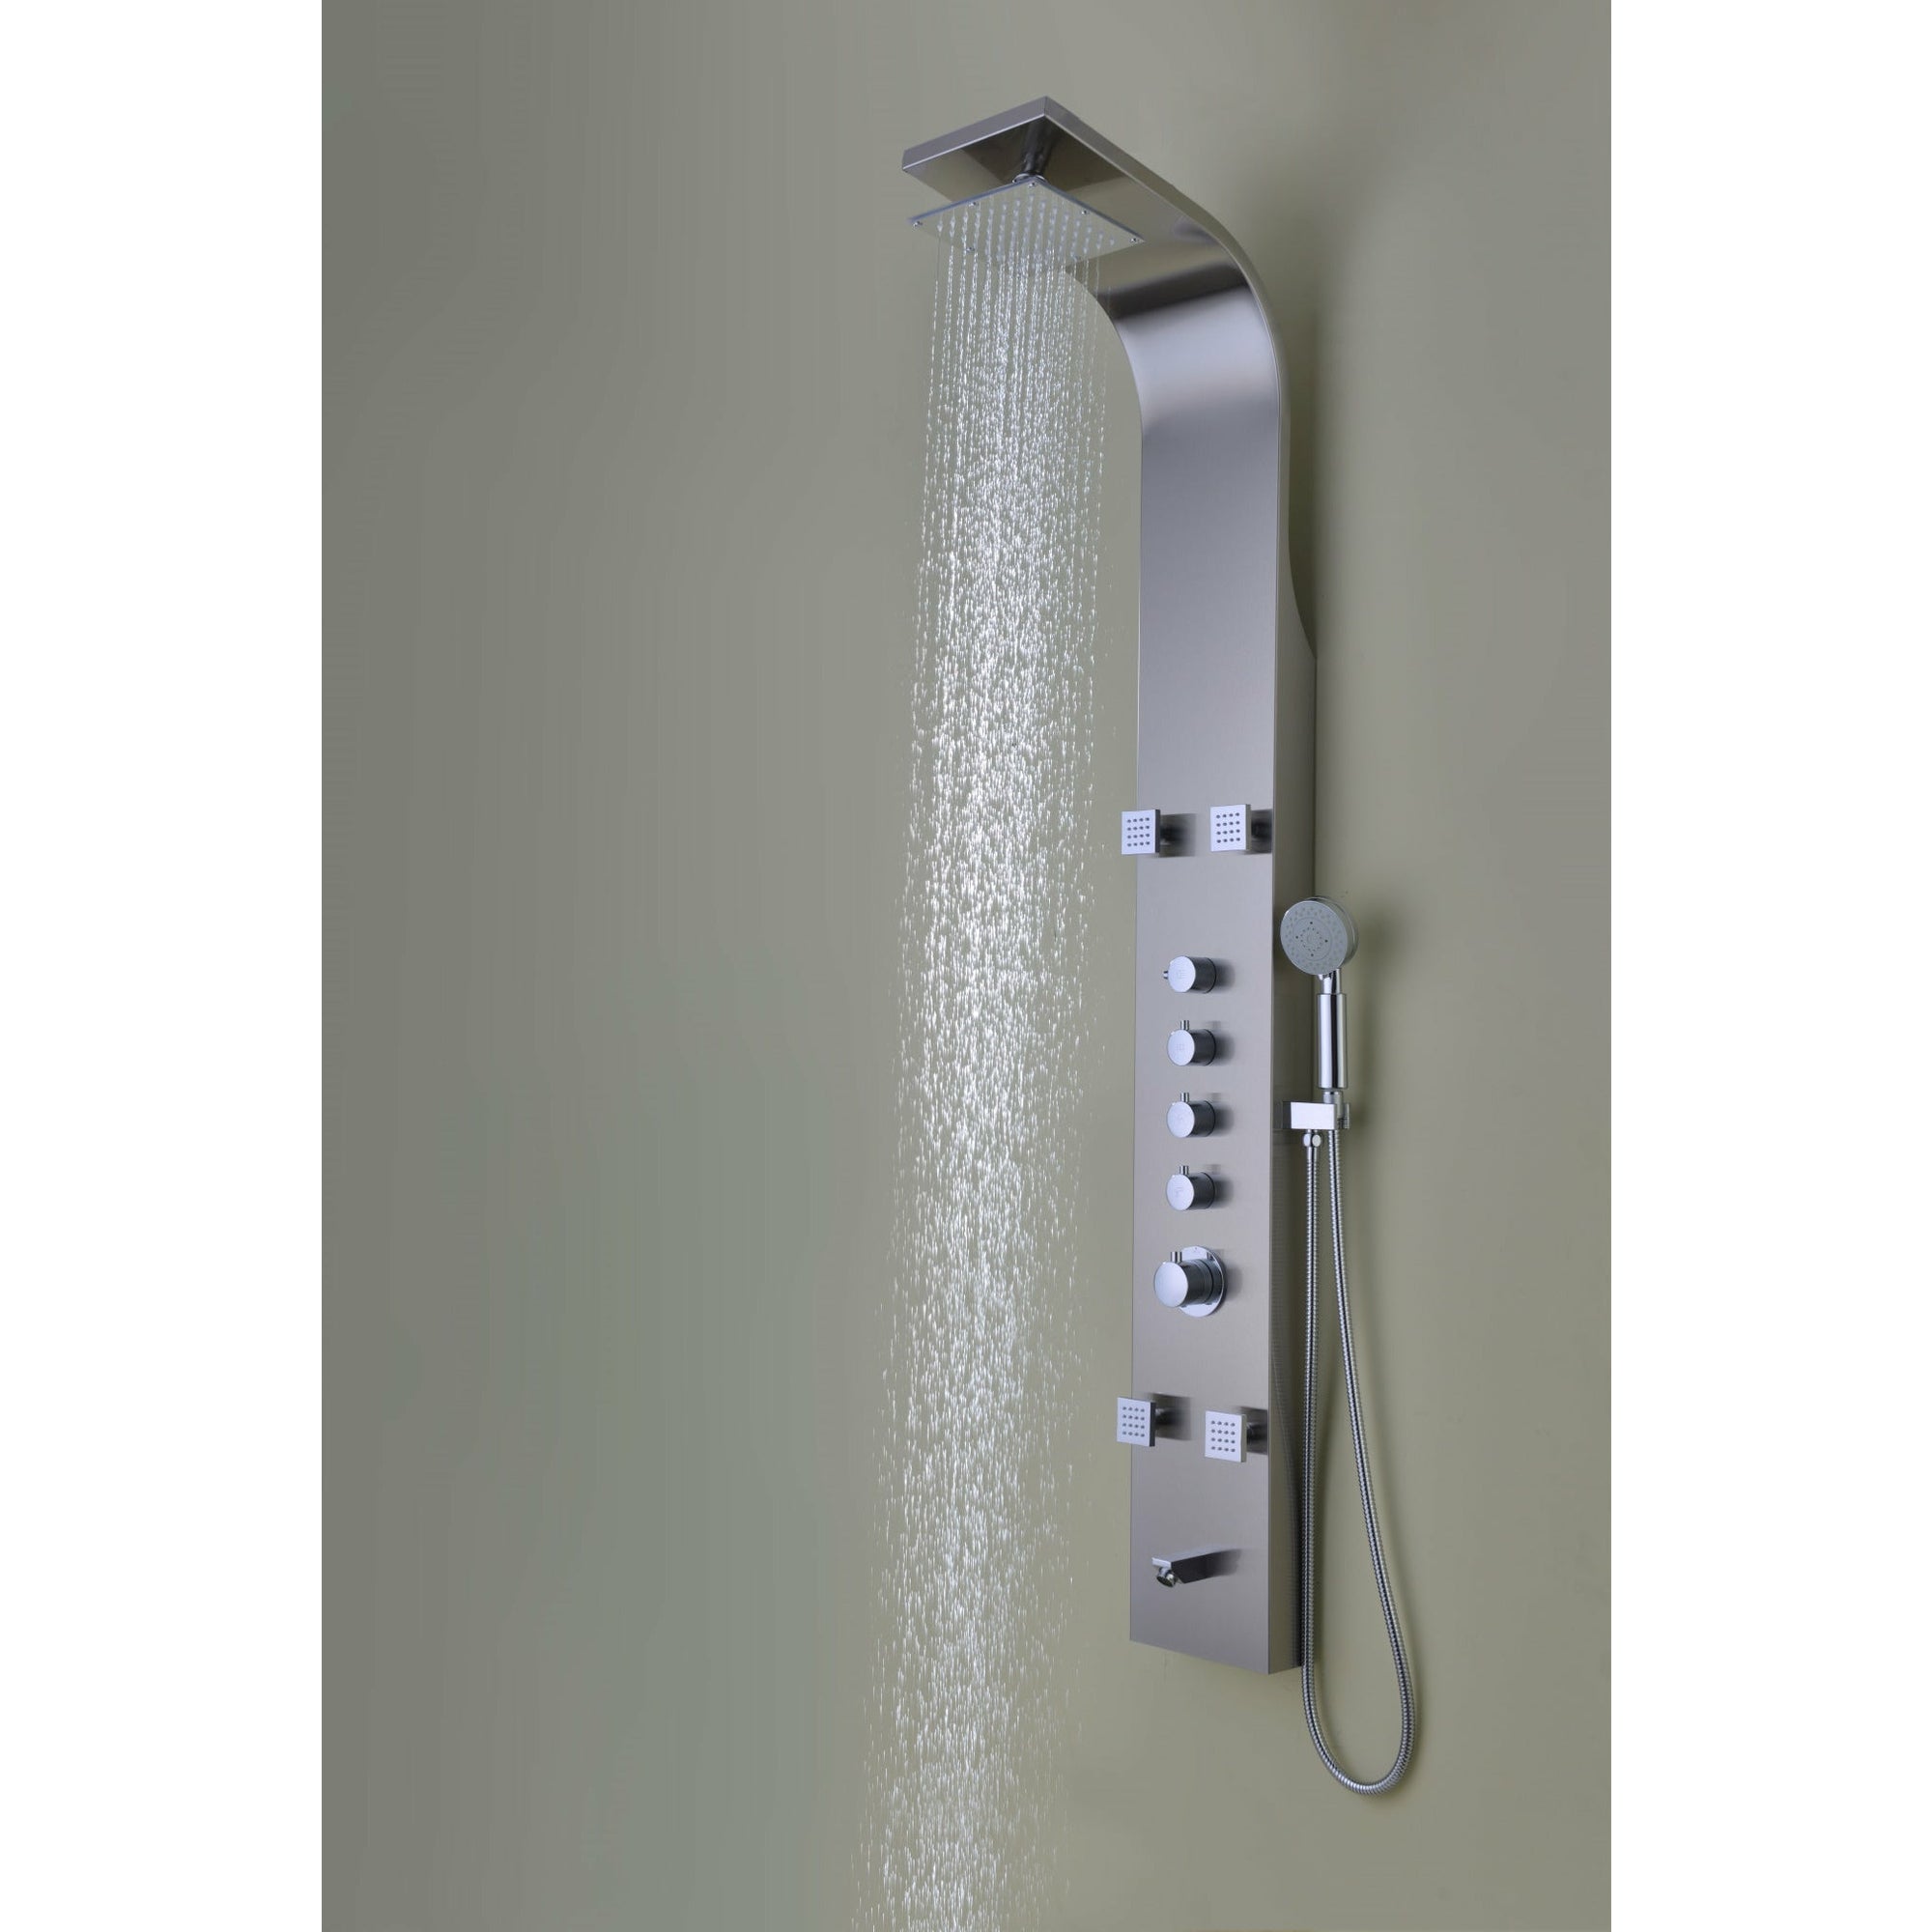 Anzzi Echo 63.5 Inches Full Body Shower Panel with Swiveling Heavy Rain Shower Head, Acu-stream Body Massage Jets, Shower Control Knobs and Euro-Grip Free Range Hand Sprayer in Brushed Stainless Steel SP-AZ022 - Vital Hydrotherapy